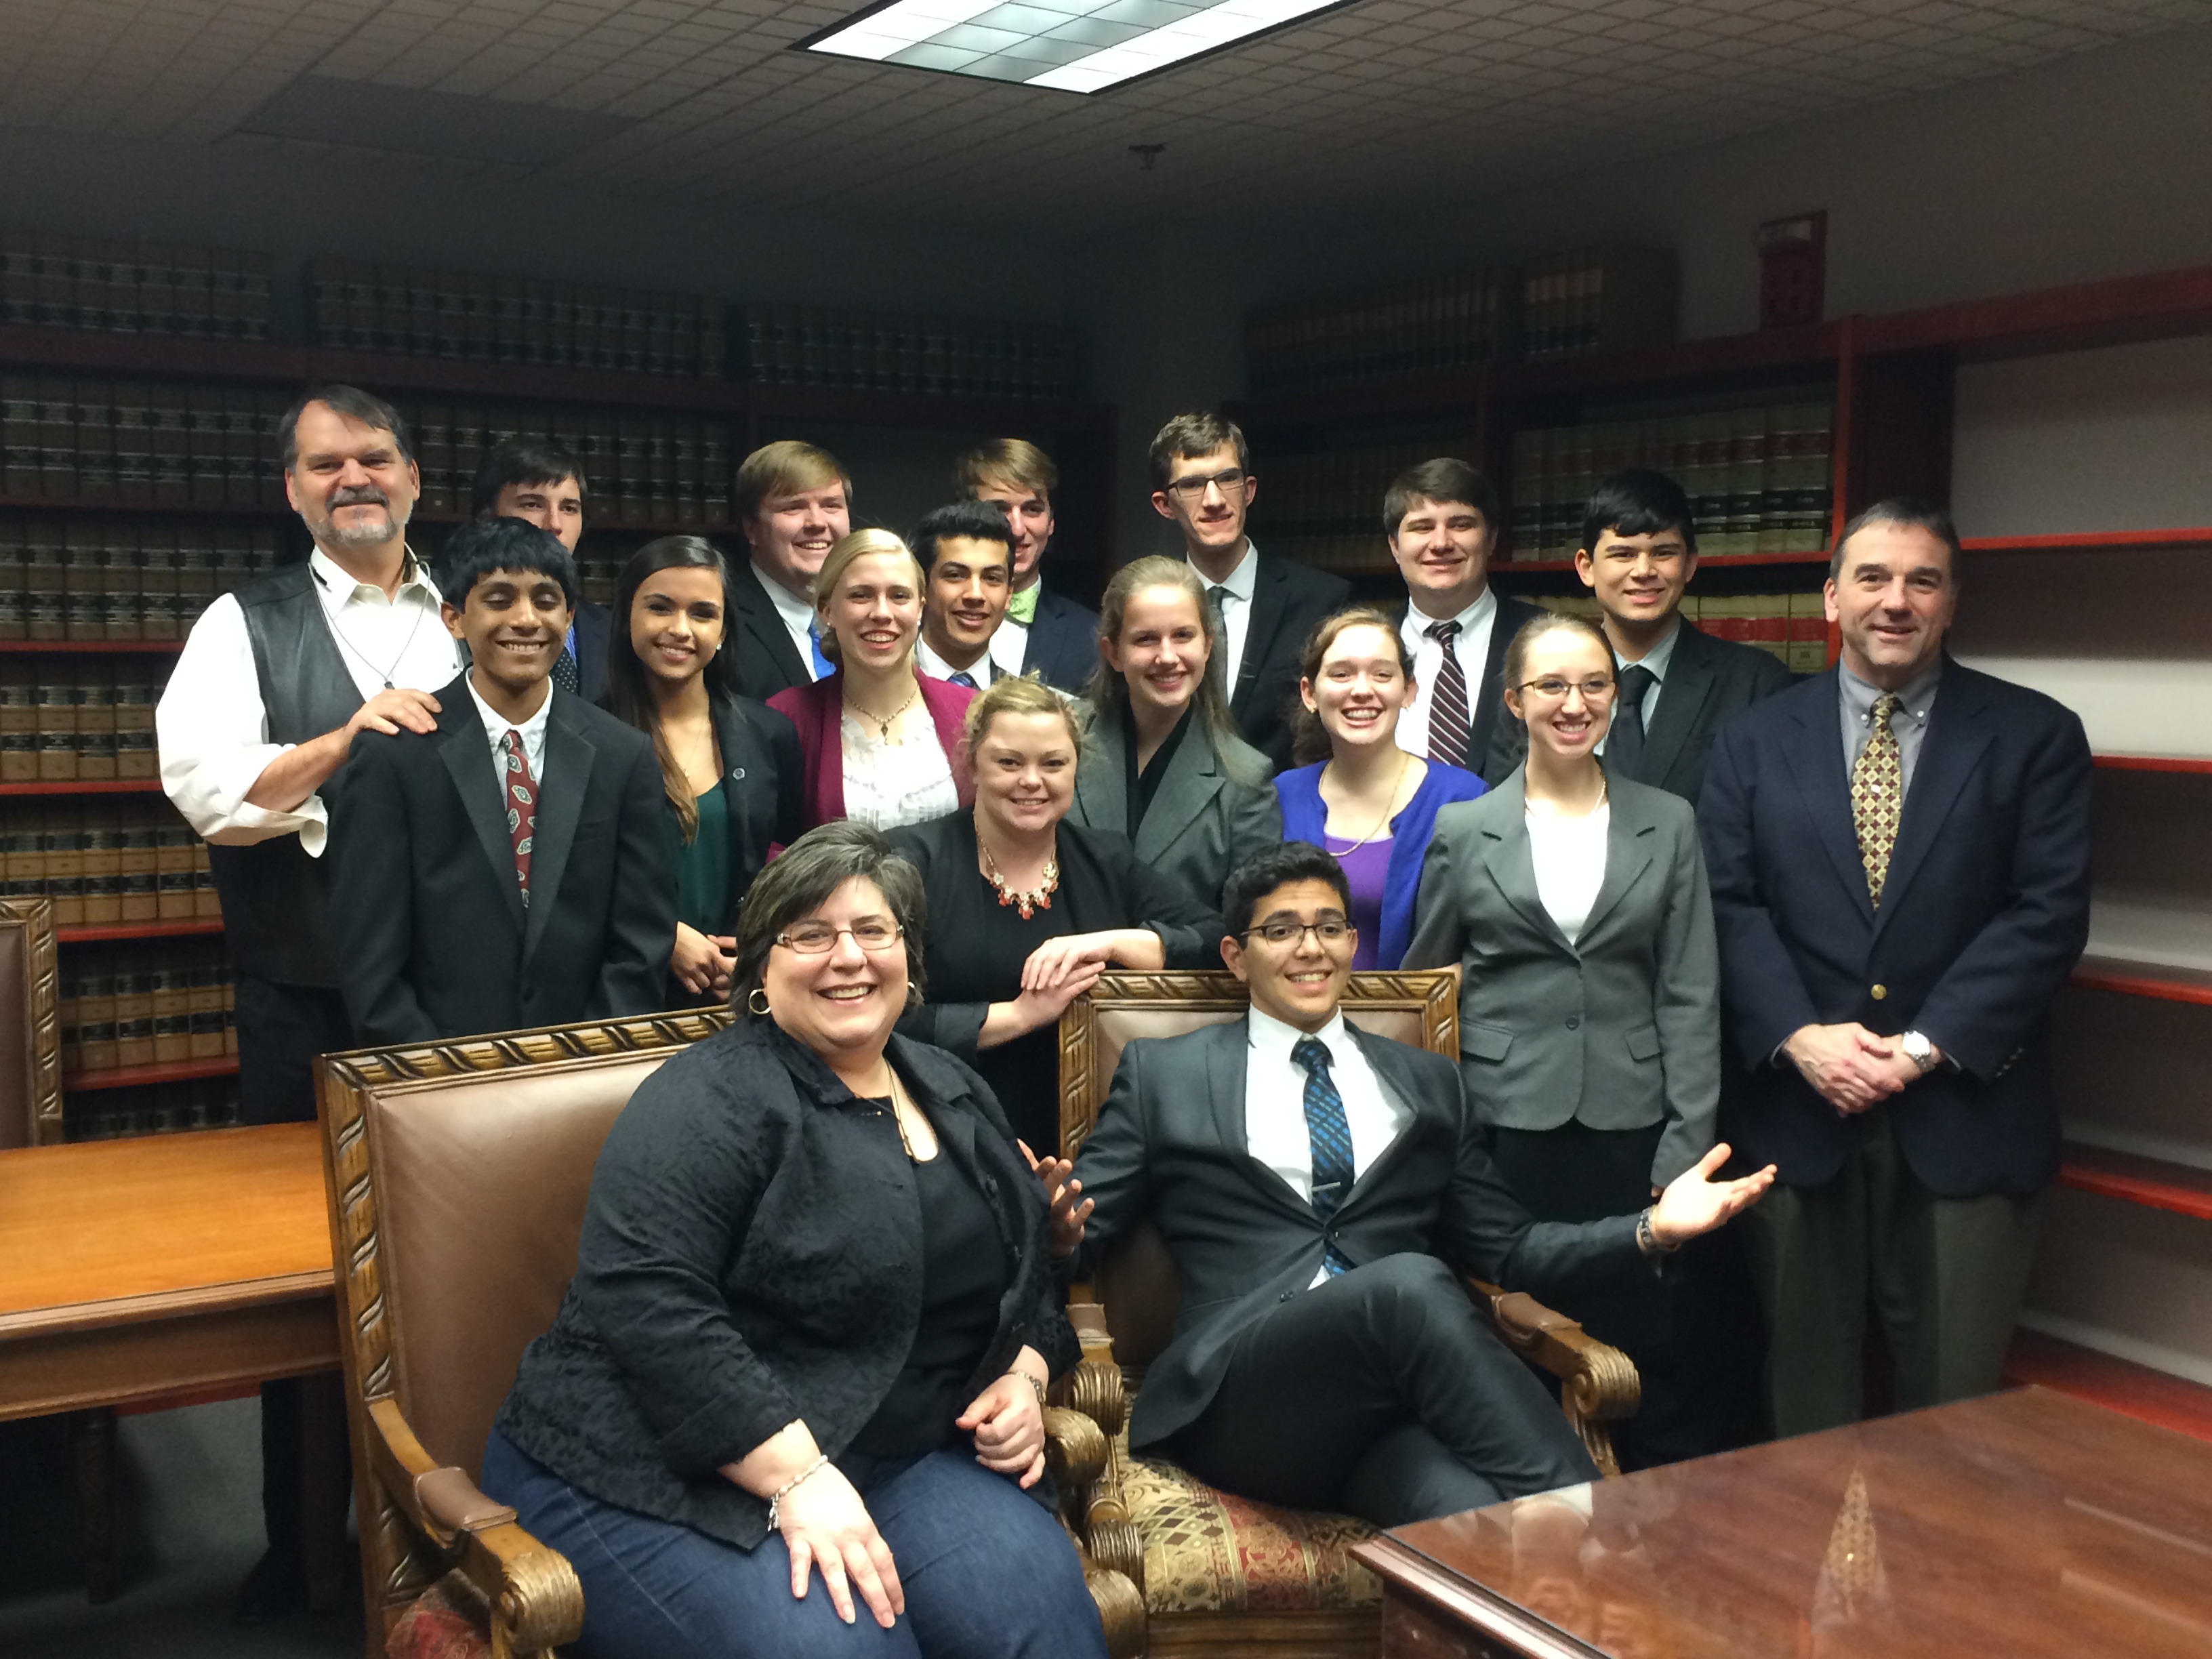 Pinecrest Academy Named Regional Champions by Mock Trial Judges